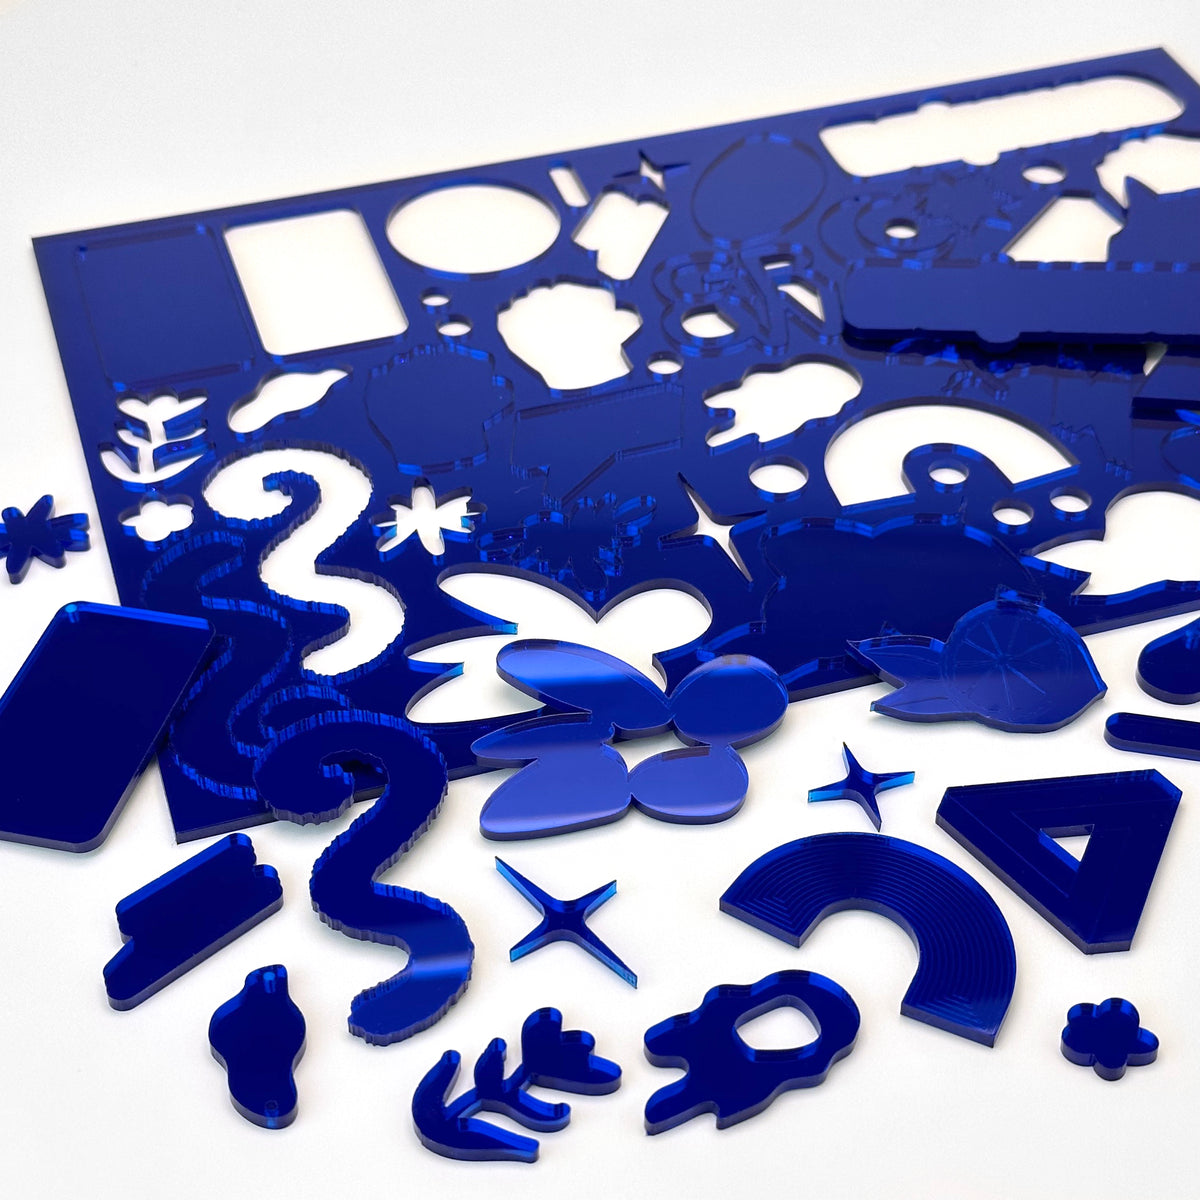 Mirror Blue Acrylic with laser cutting only - 300x200mm